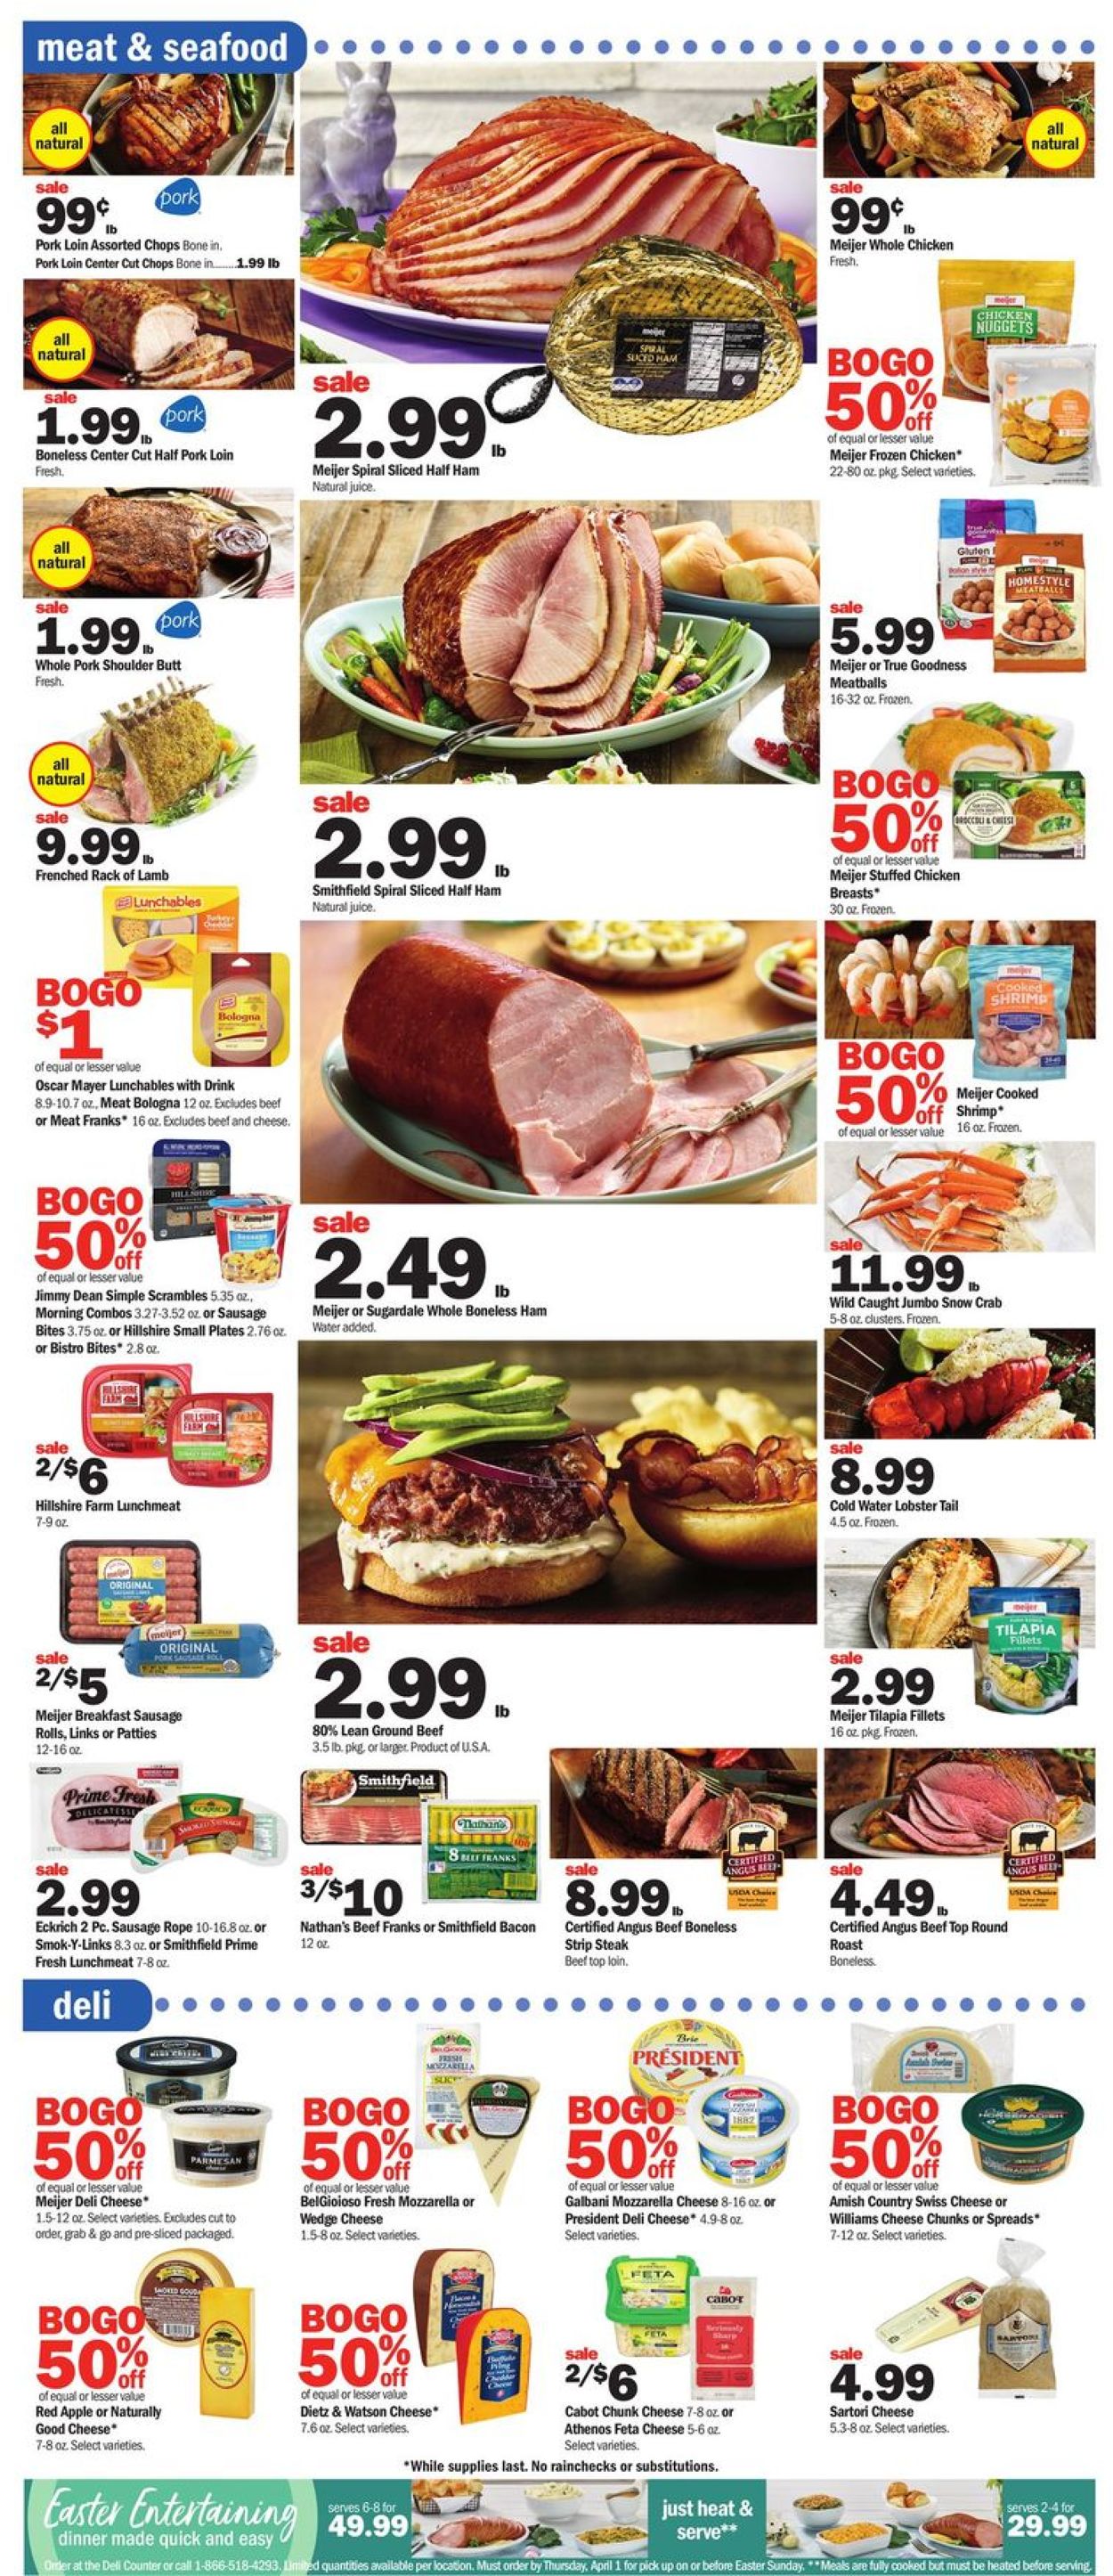 Meijer - Easter 2021 Ad Weekly Ad Circular - valid 03/21-03/27/2021 (Page 2)